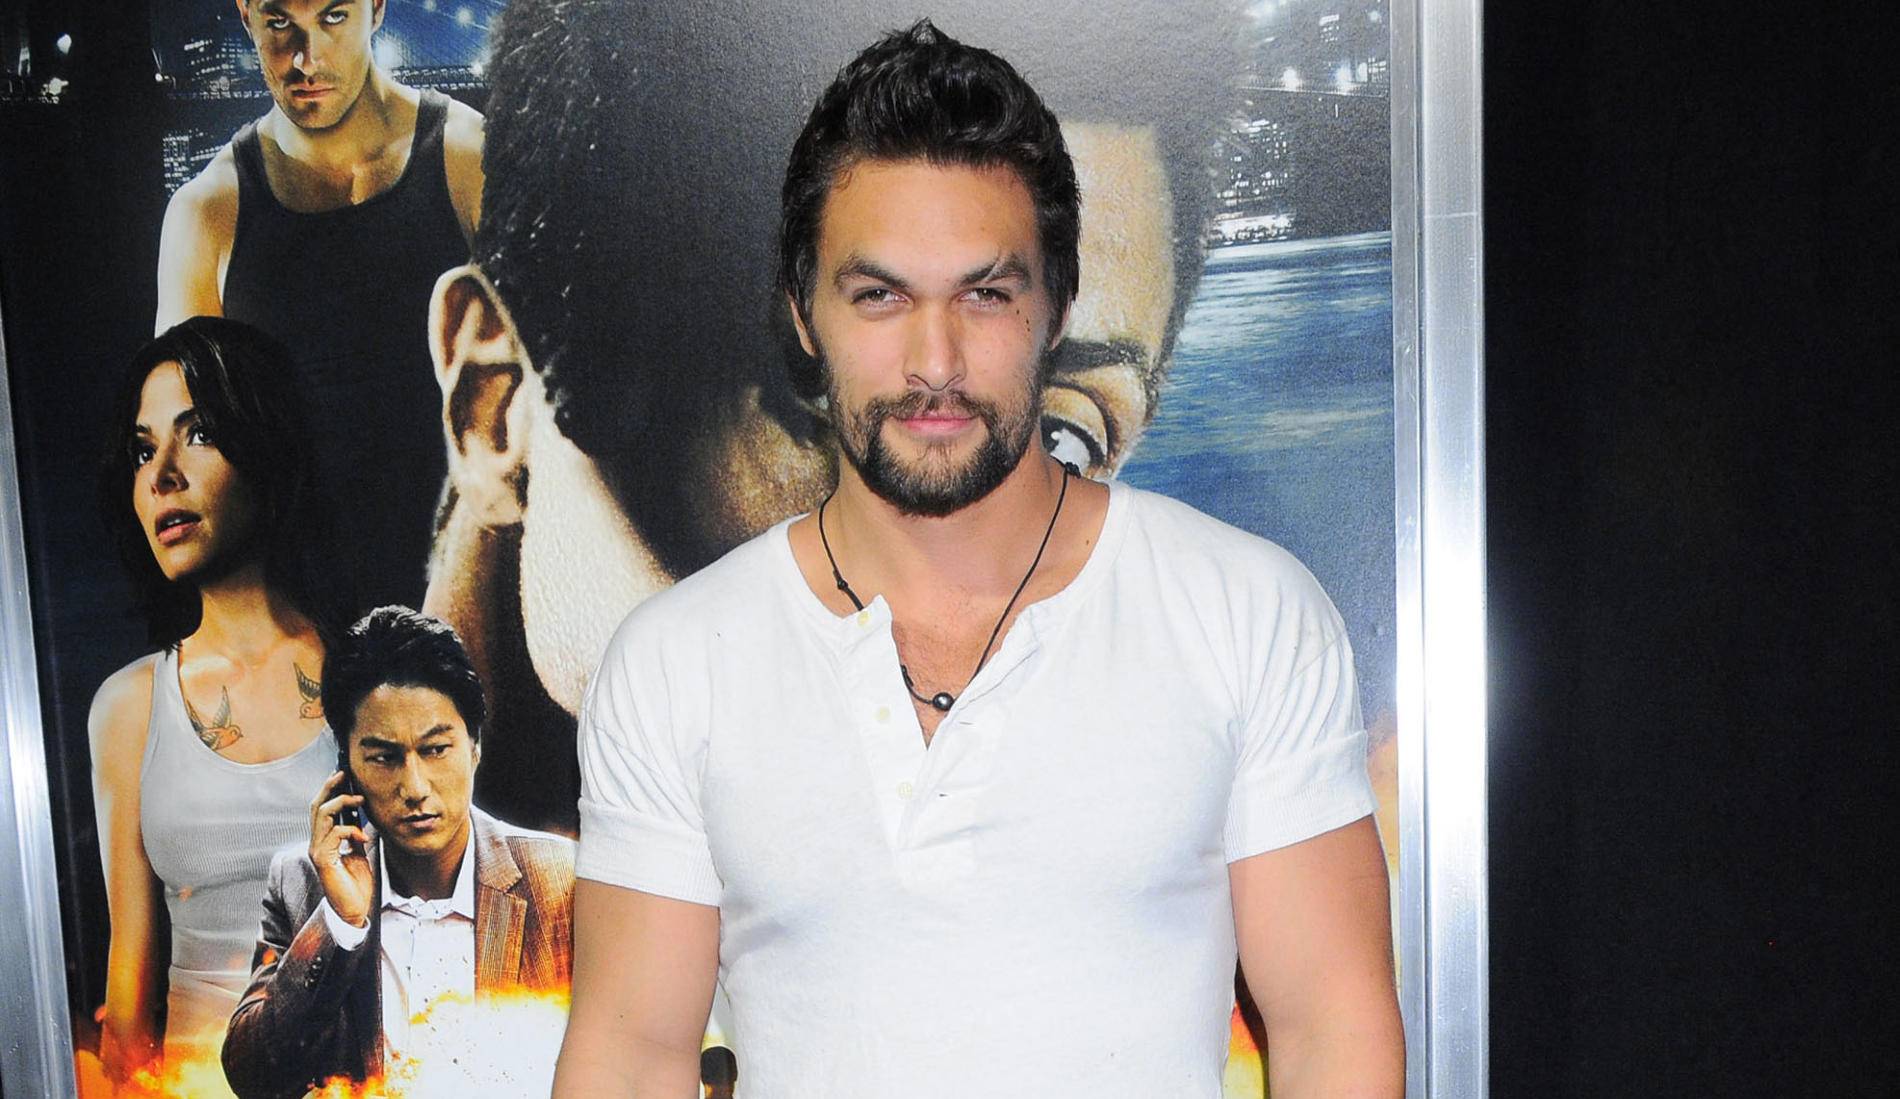 Jason Momoa Is the Most Bro-iest of Bros | The Blemish